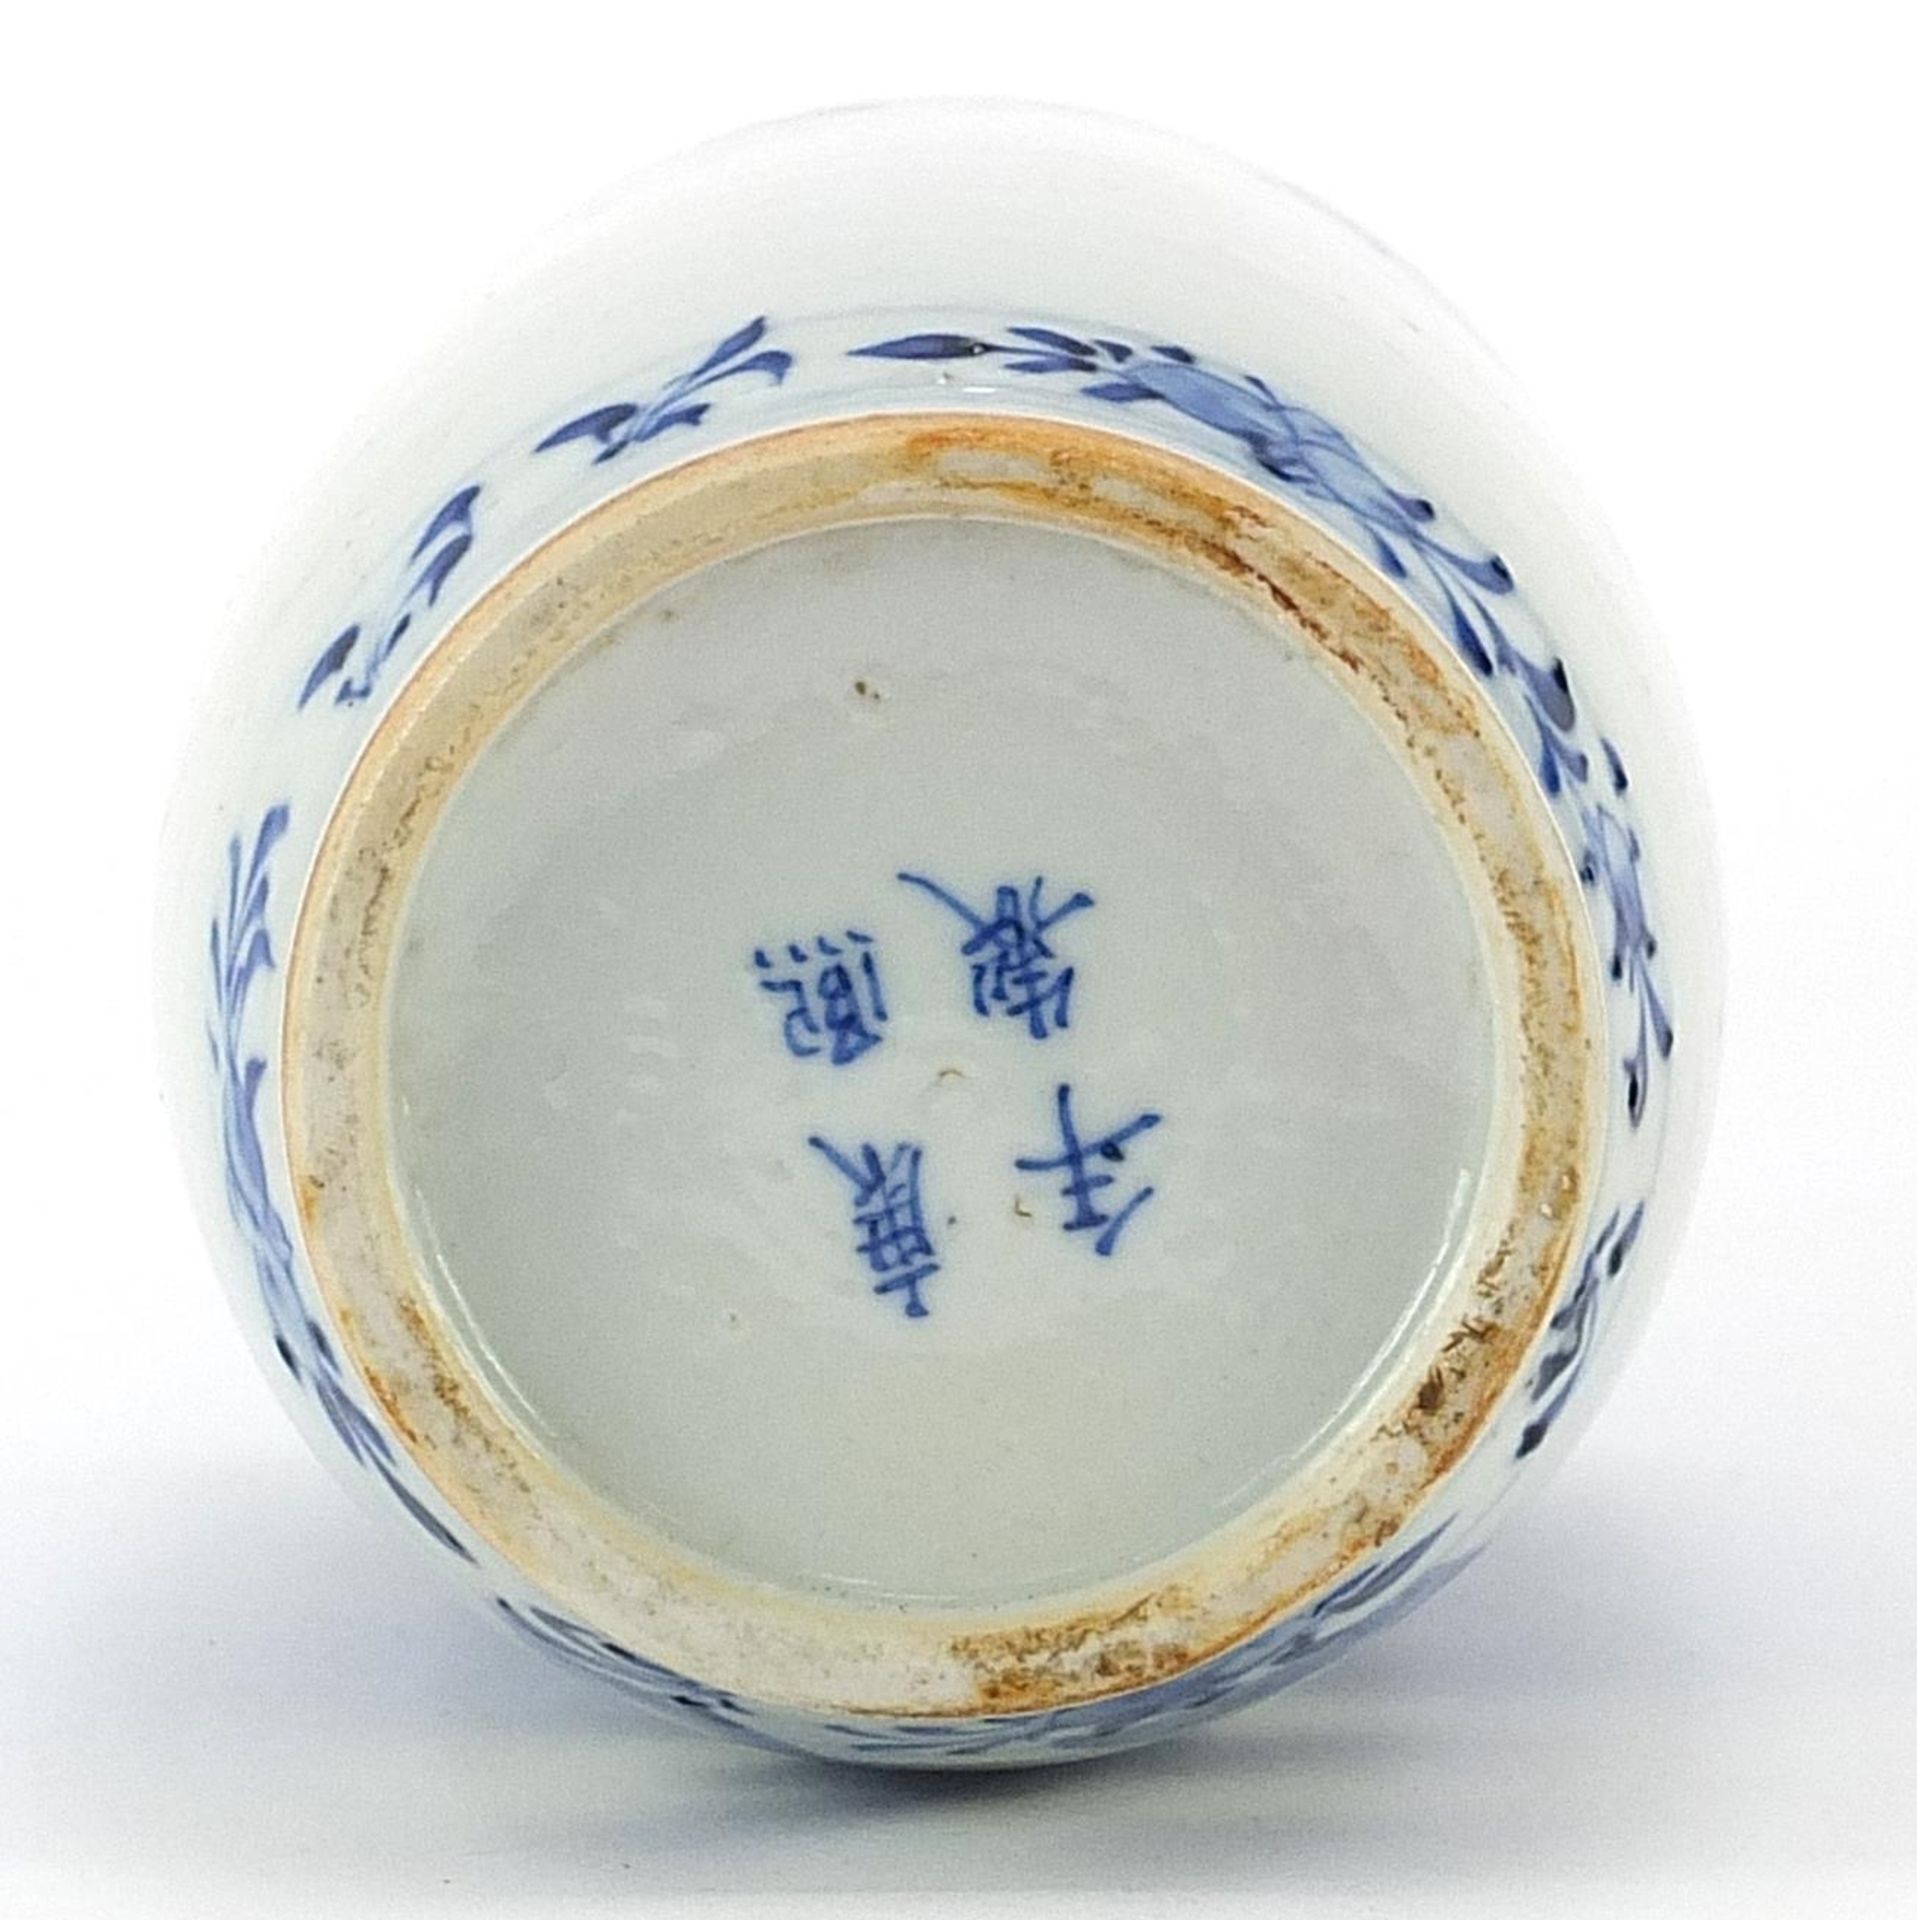 Chinese blue and white porcelain Rouleau vase hand painted with a figure crossing a bridge in a - Image 3 of 4